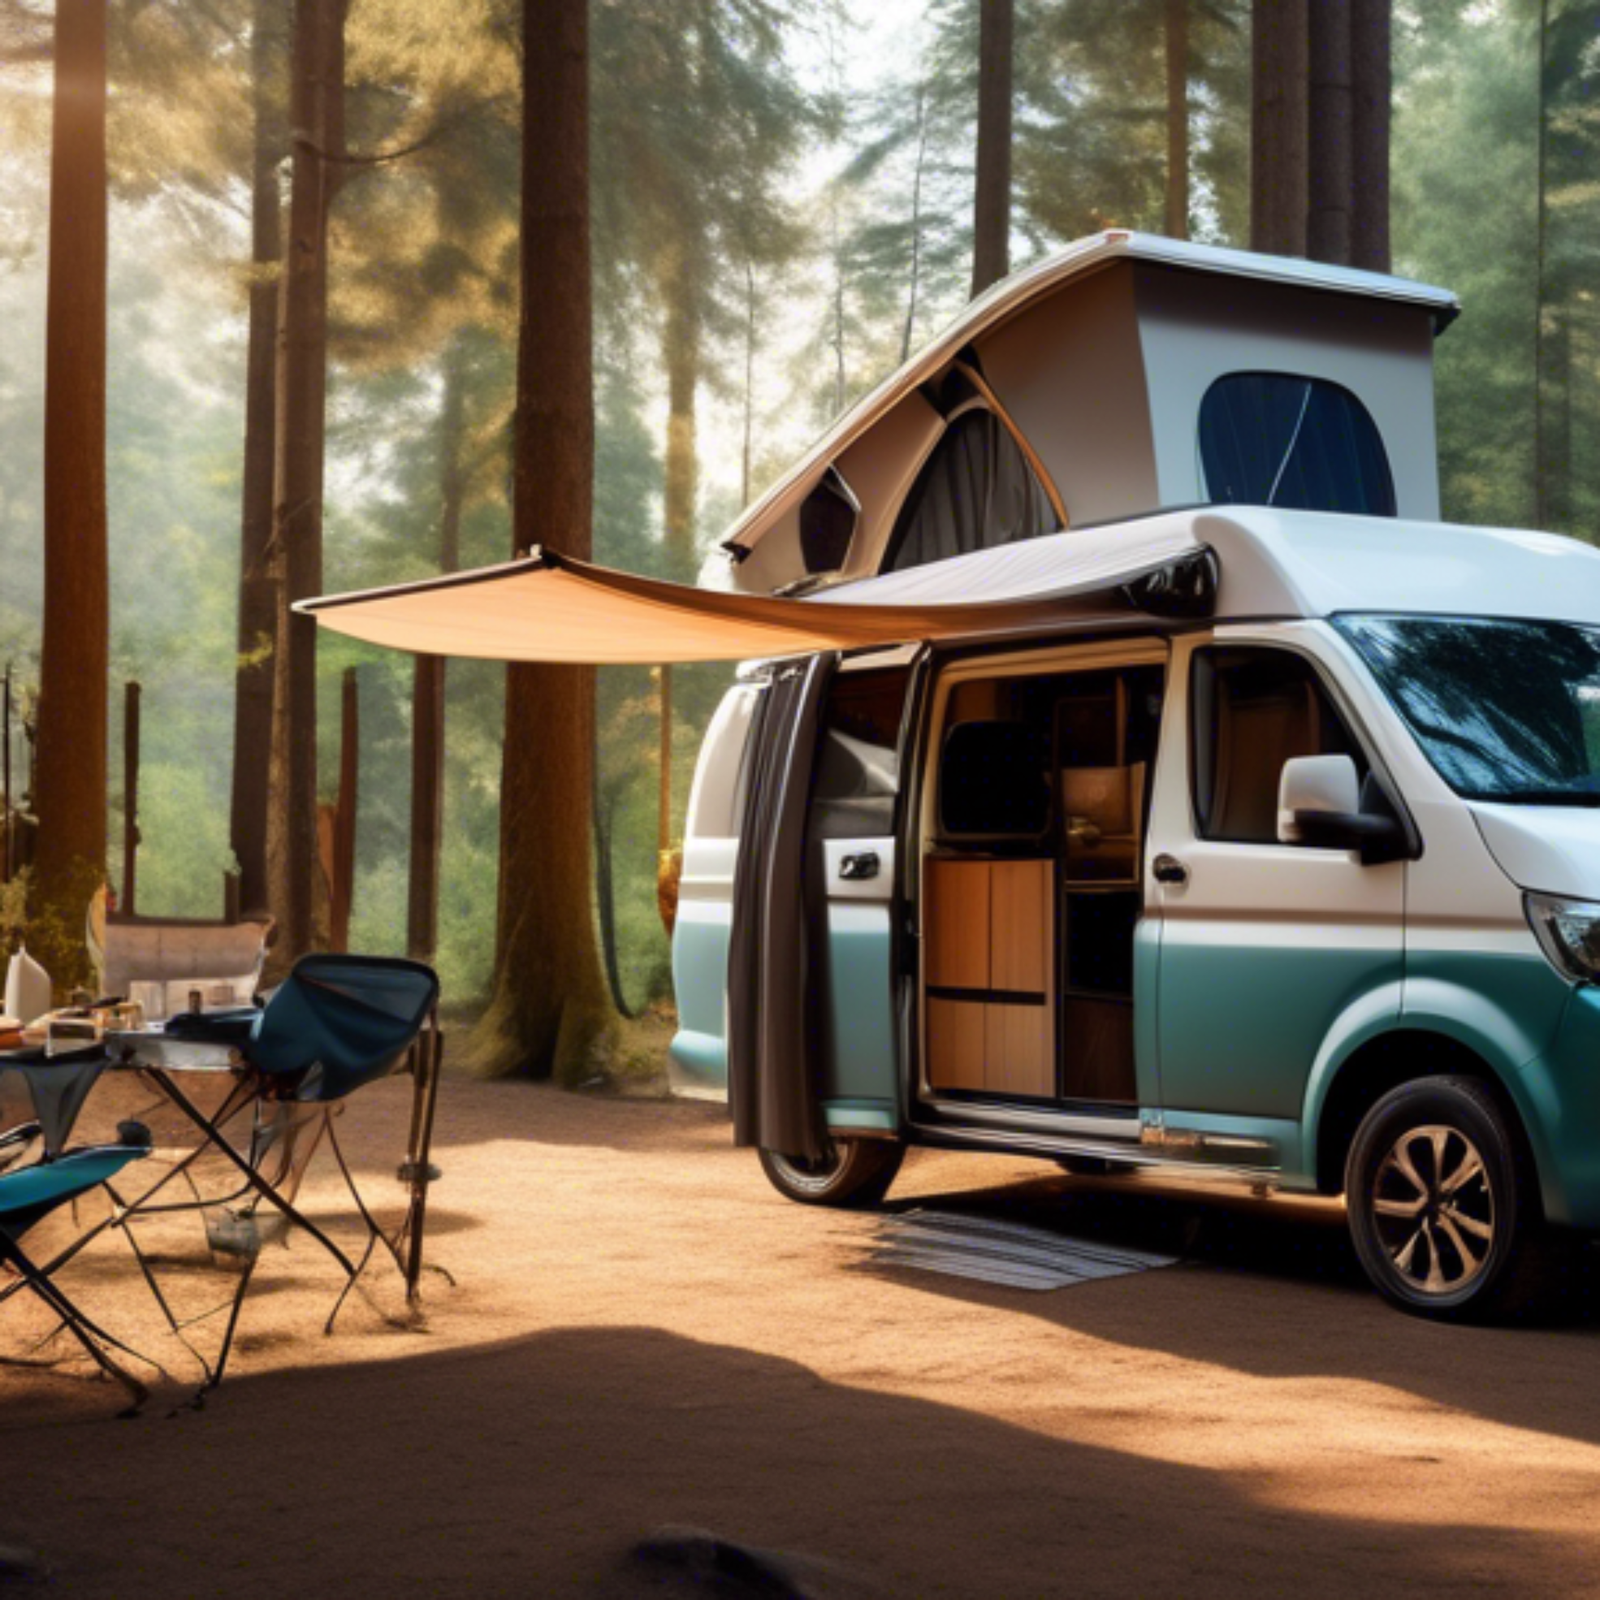 A modern camper van parked in a forest with shaded trees, surrounded by nature. The camper has windows open with light curtains gently blowing, a solar pan